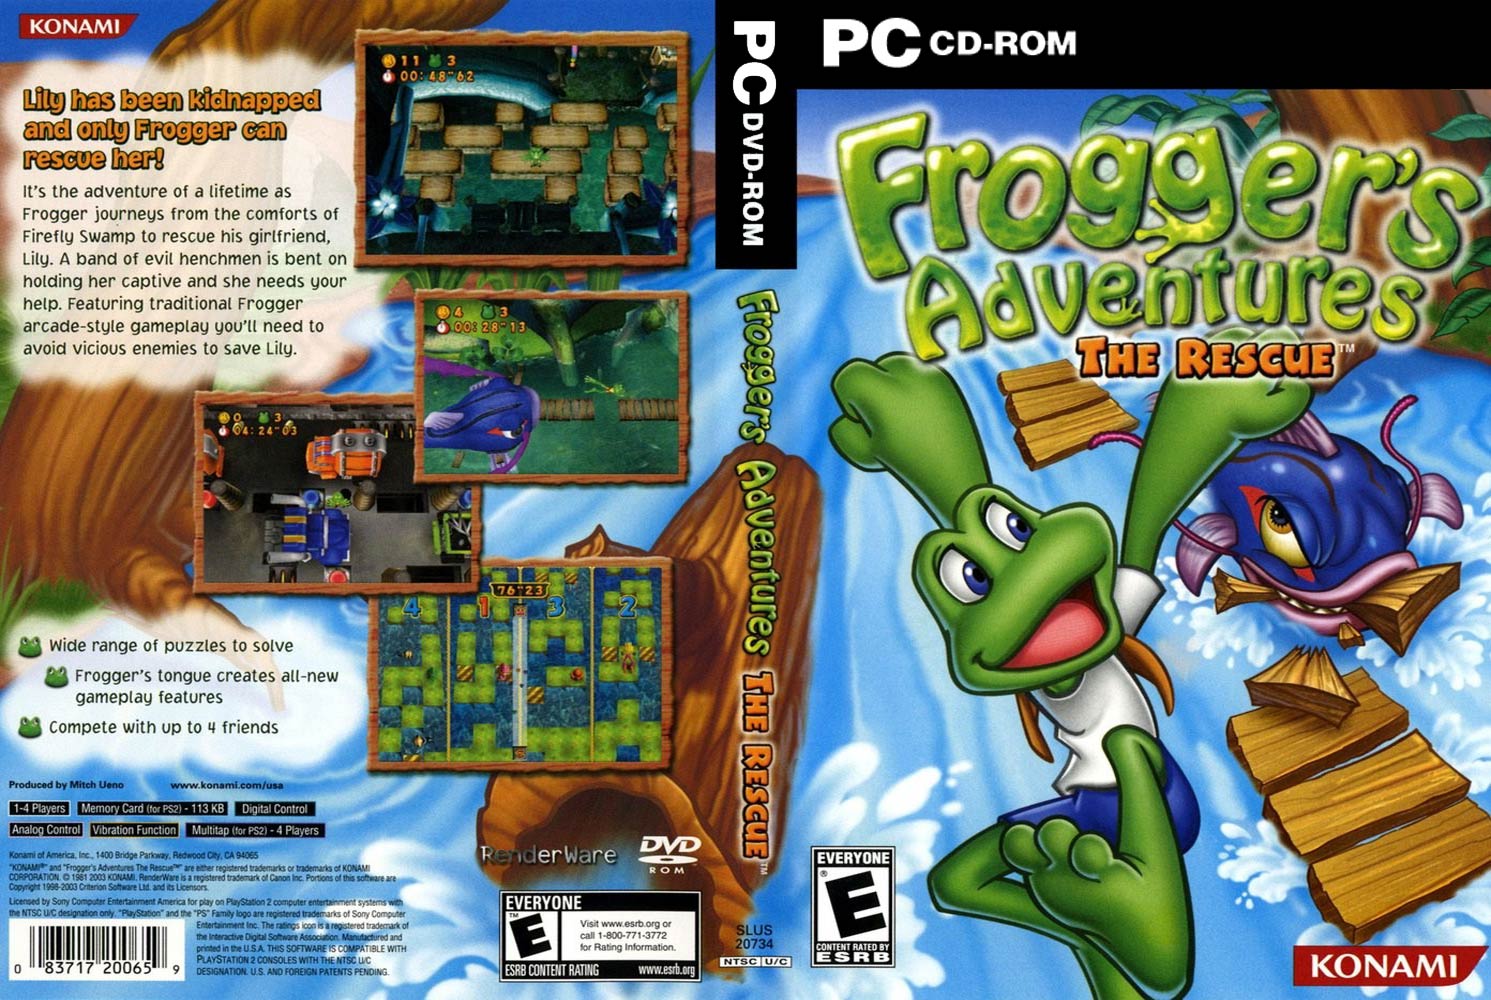 Frogger's Adventures: The Rescue - DVD obal